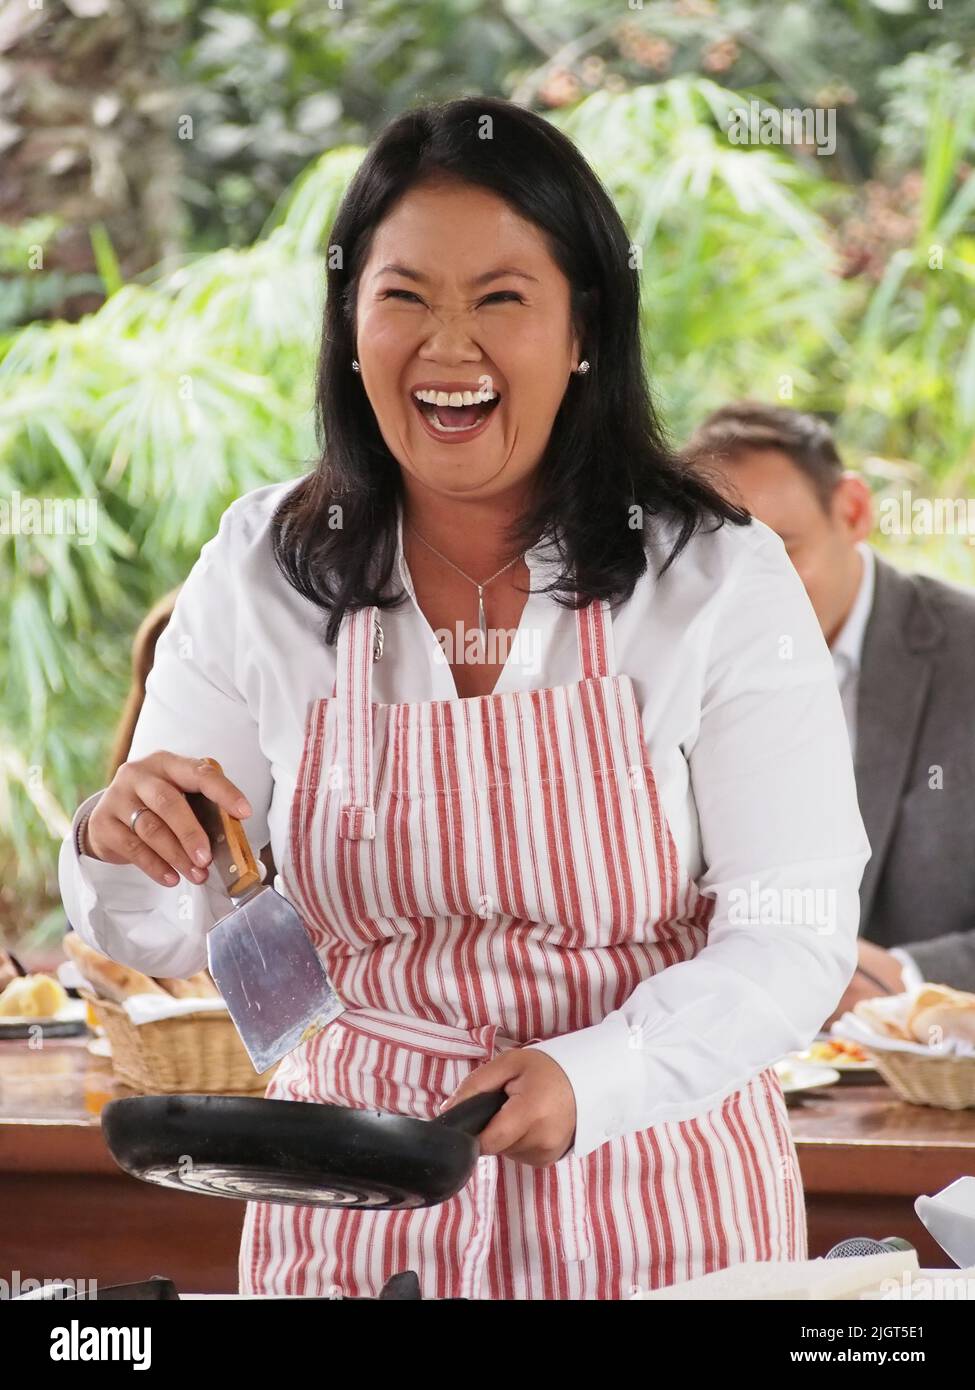 Keiko Fujimori had today, in elections day, breakfast with her family and the accredited press before heading to cast her vote. Stock Photo